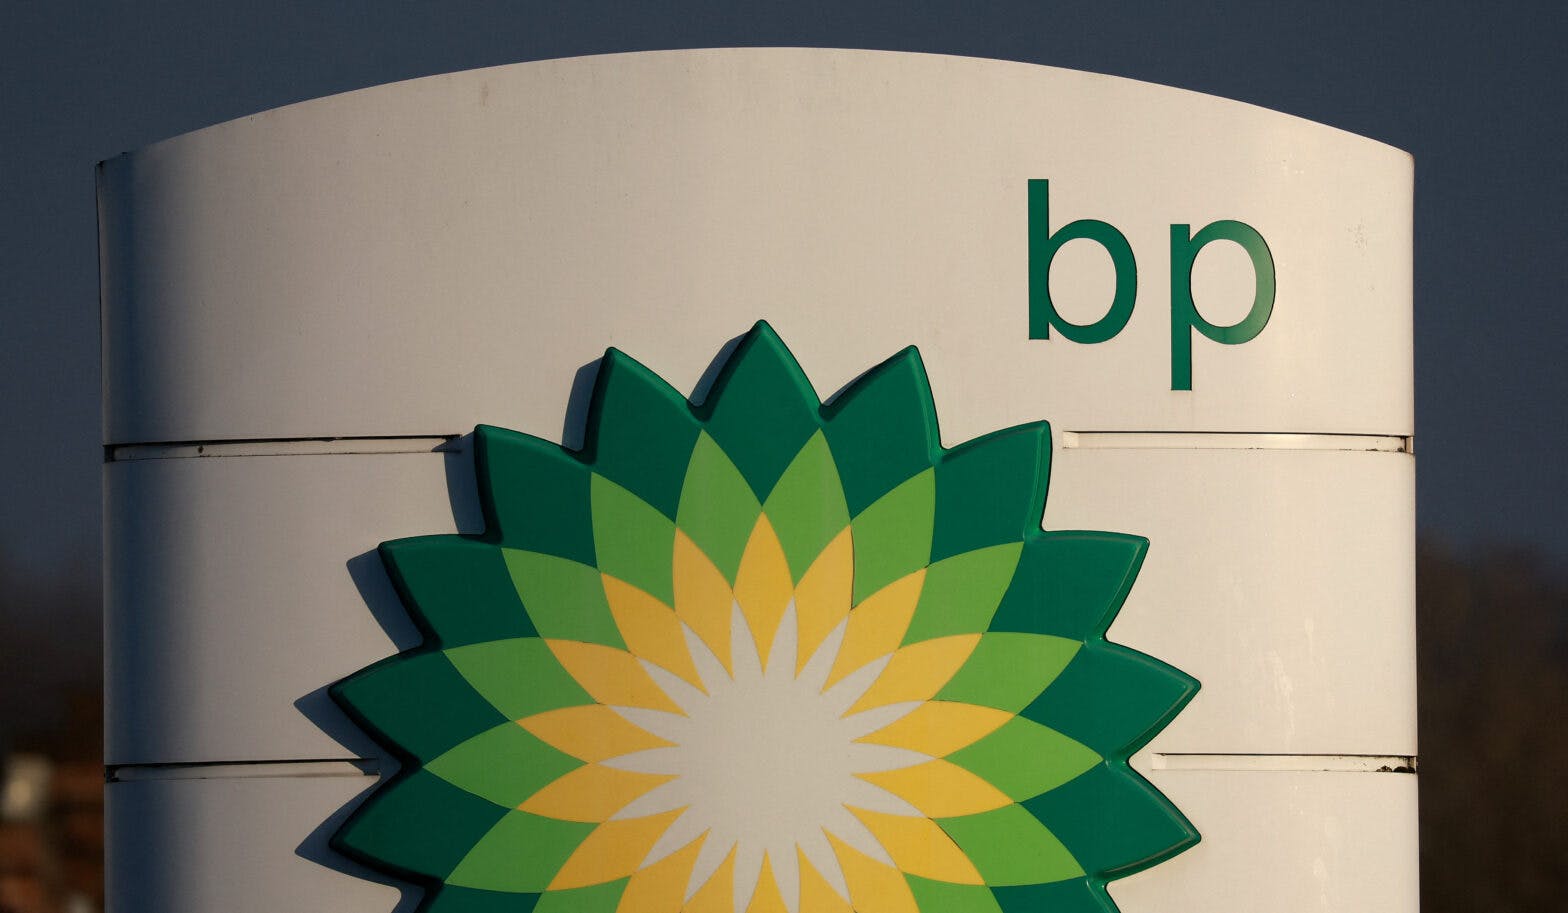 Signage is seen outside a BP (British Petroleum) petrol station in Liverpool